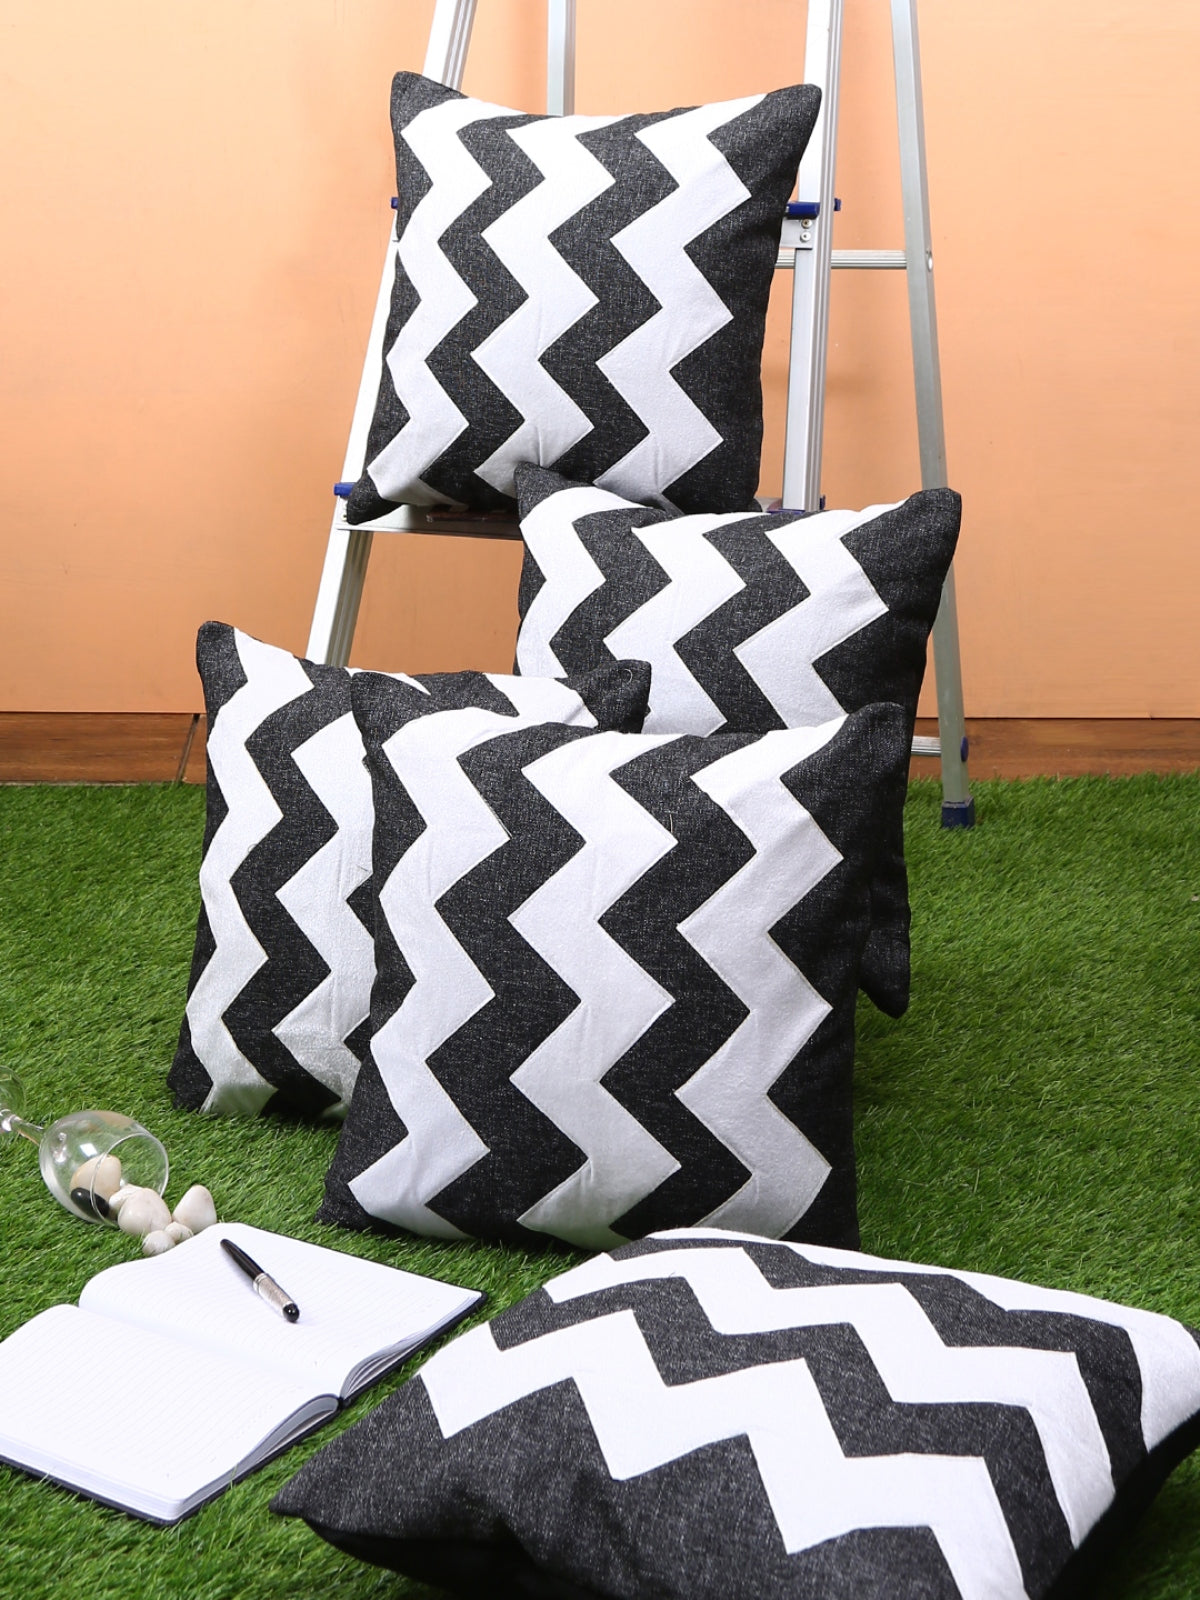 Black & White Set of 5 Polyester 16 Inch x 16 Inch Cushion Covers